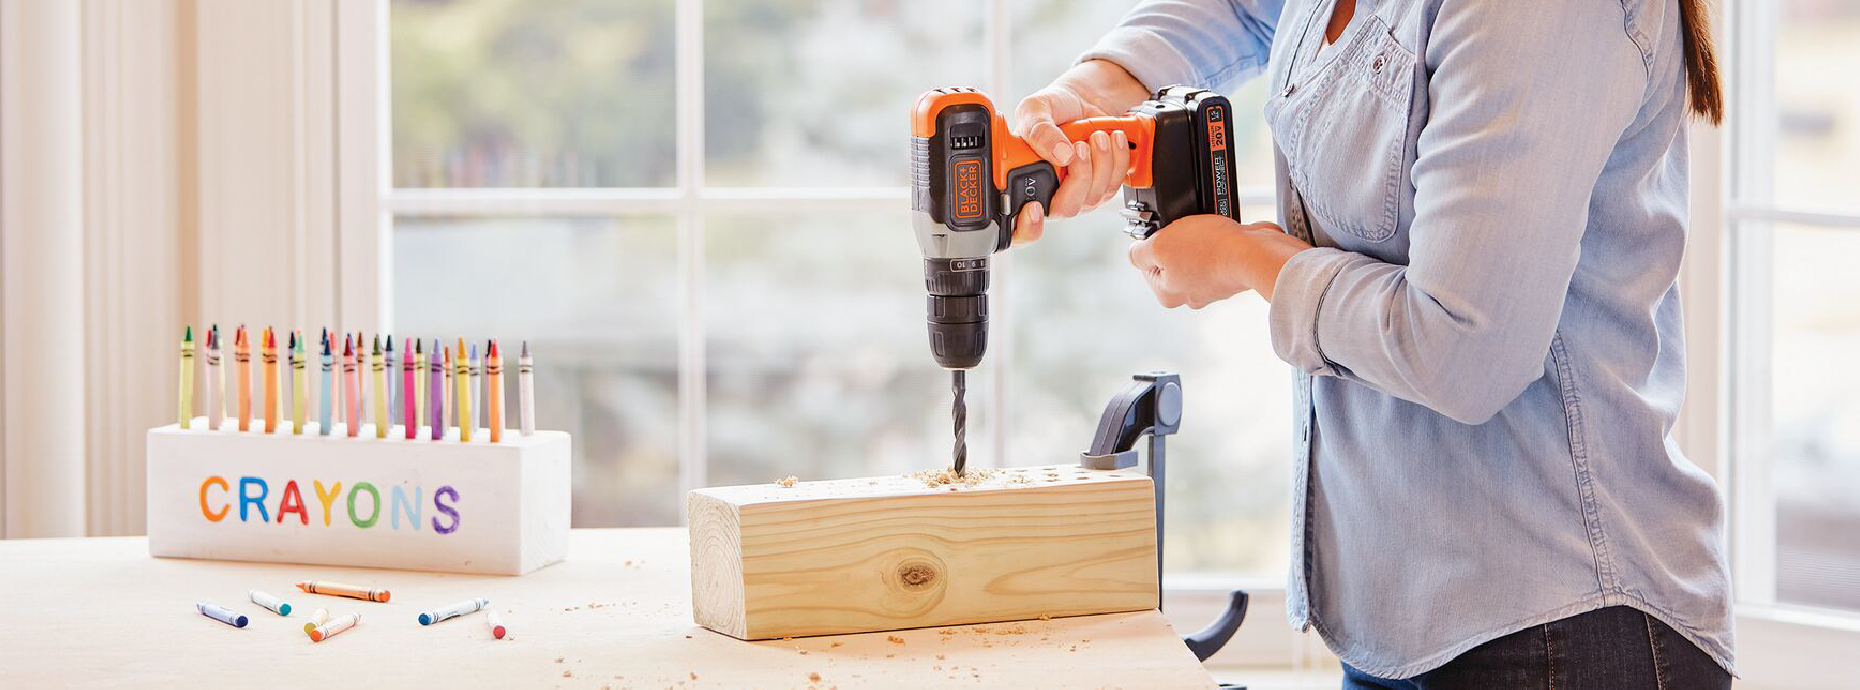 BLACK+DECKER 20V MAX* Cordless Drill With 28-Piece Home Project